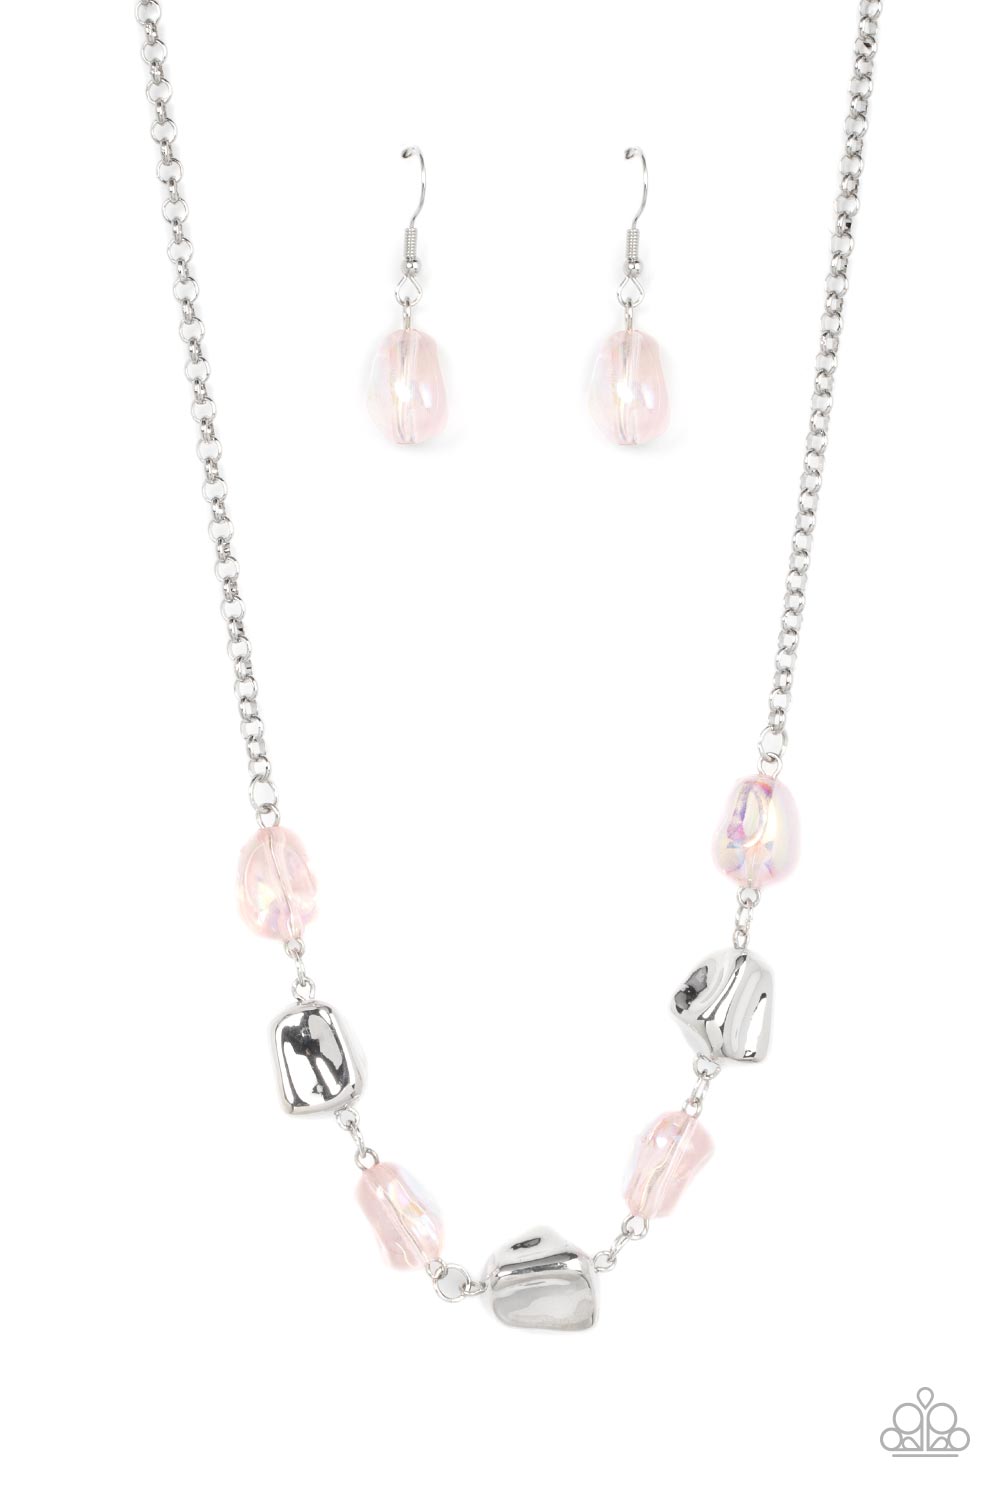 five-dollar-jewelry-inspirational-iridescence-pink-necklace-paparazzi-accessories